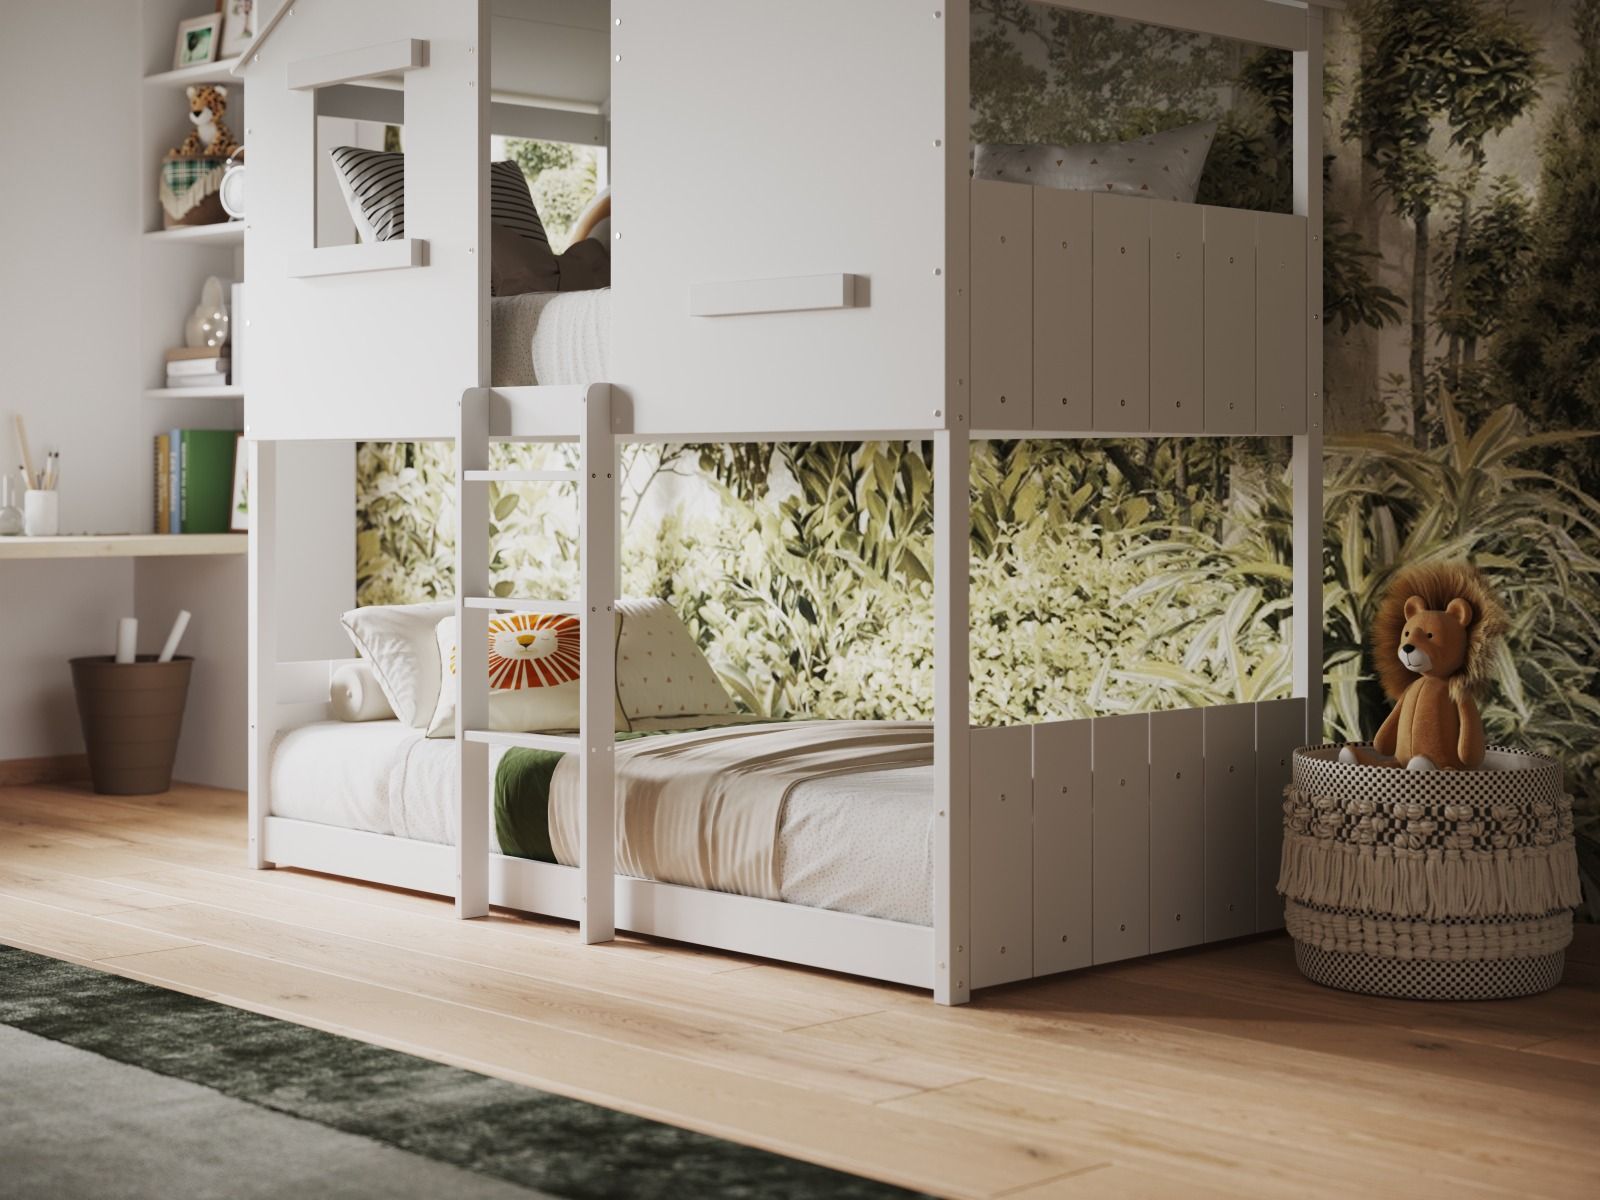 Flair Jungle House Wooden Bunk Bed - White